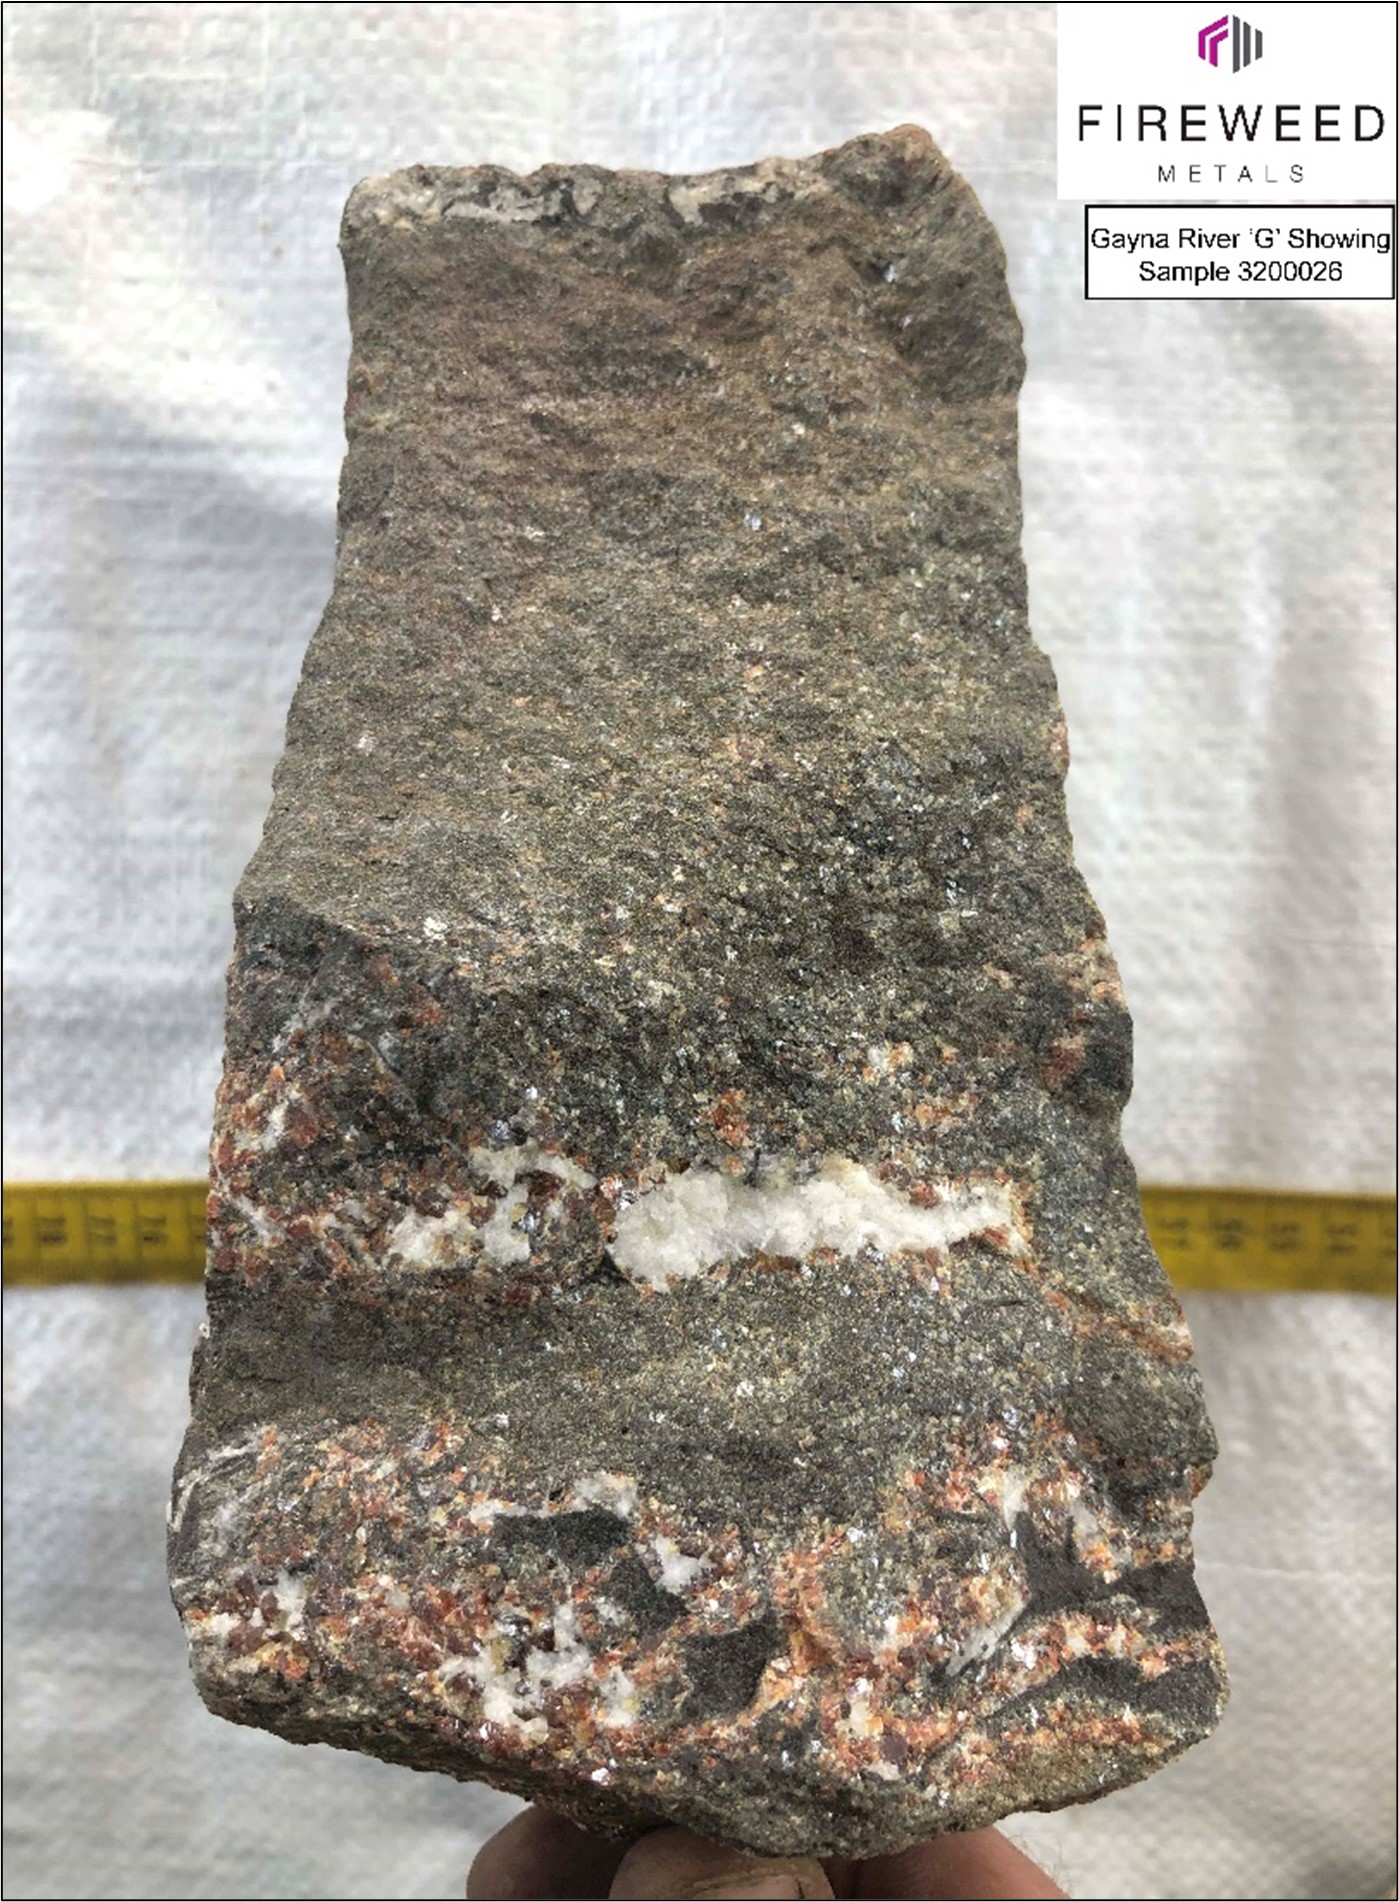 Gayna River ’G’ showing, sample 3200026. Lower-Host angular dolostone breccia. Matrix infilled with dolomite, disseminated crystalline yellow and red sphalerite, and pyrite